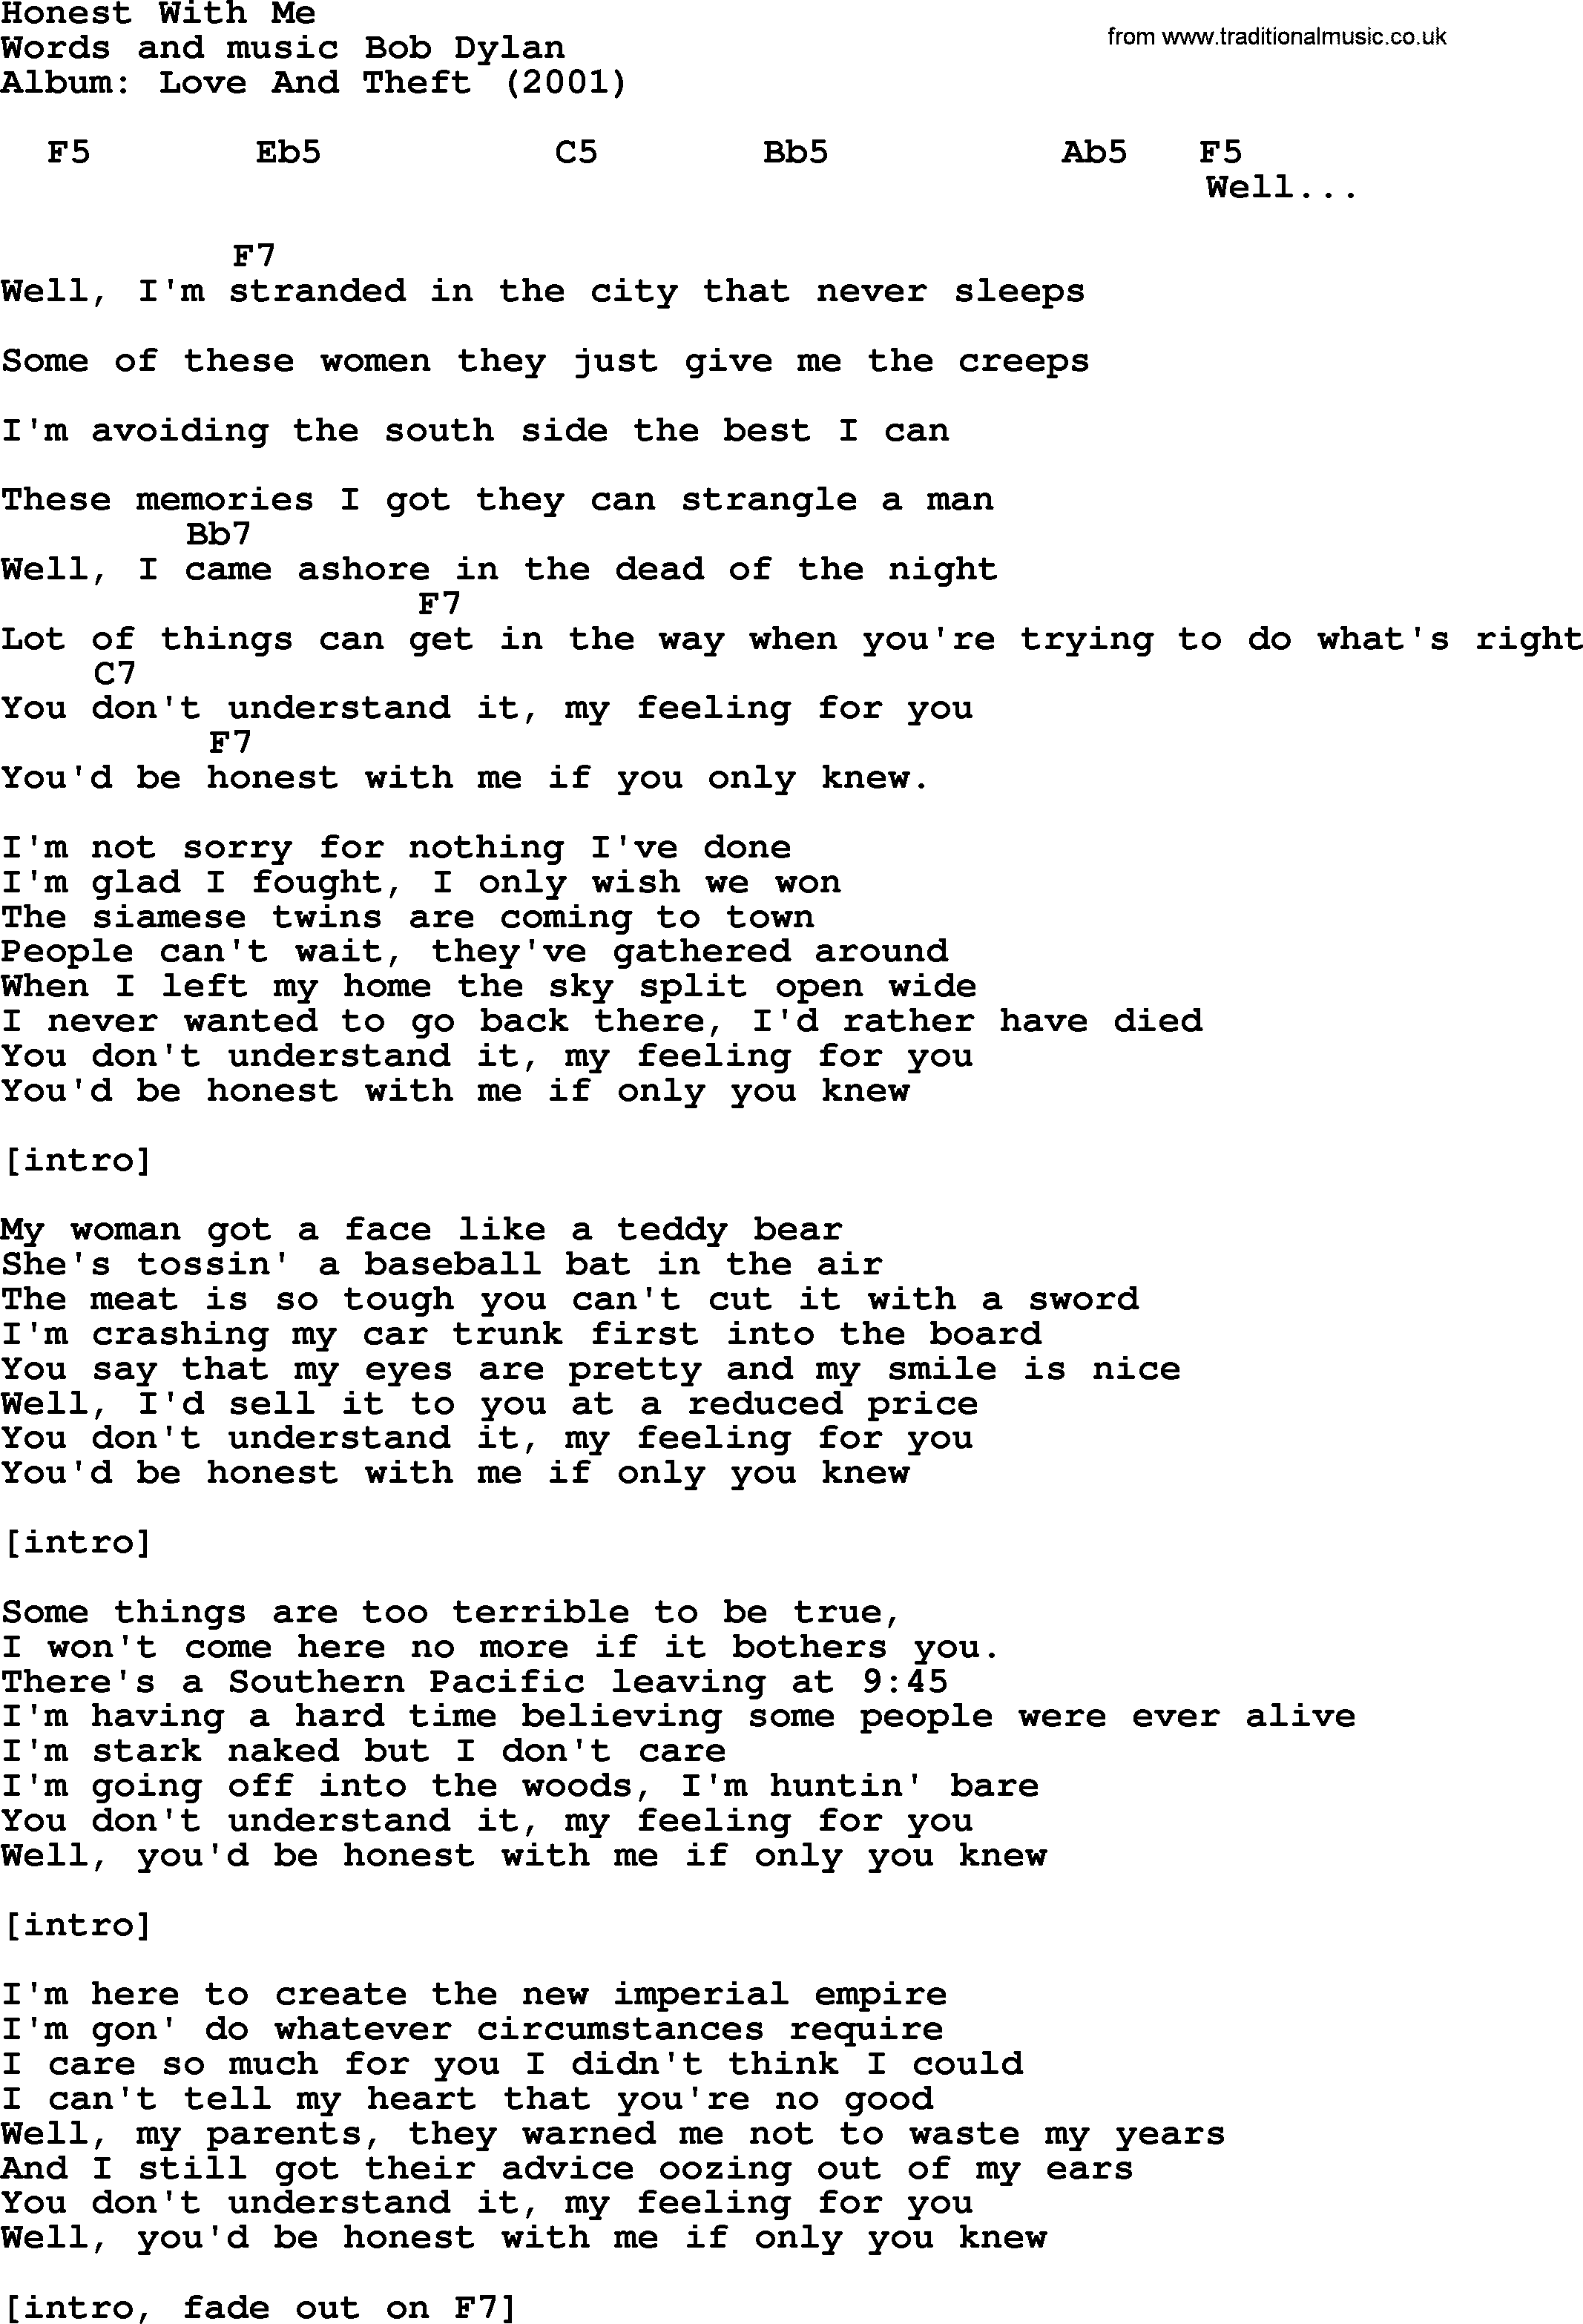 Bob Dylan song, lyrics with chords - Honest With Me